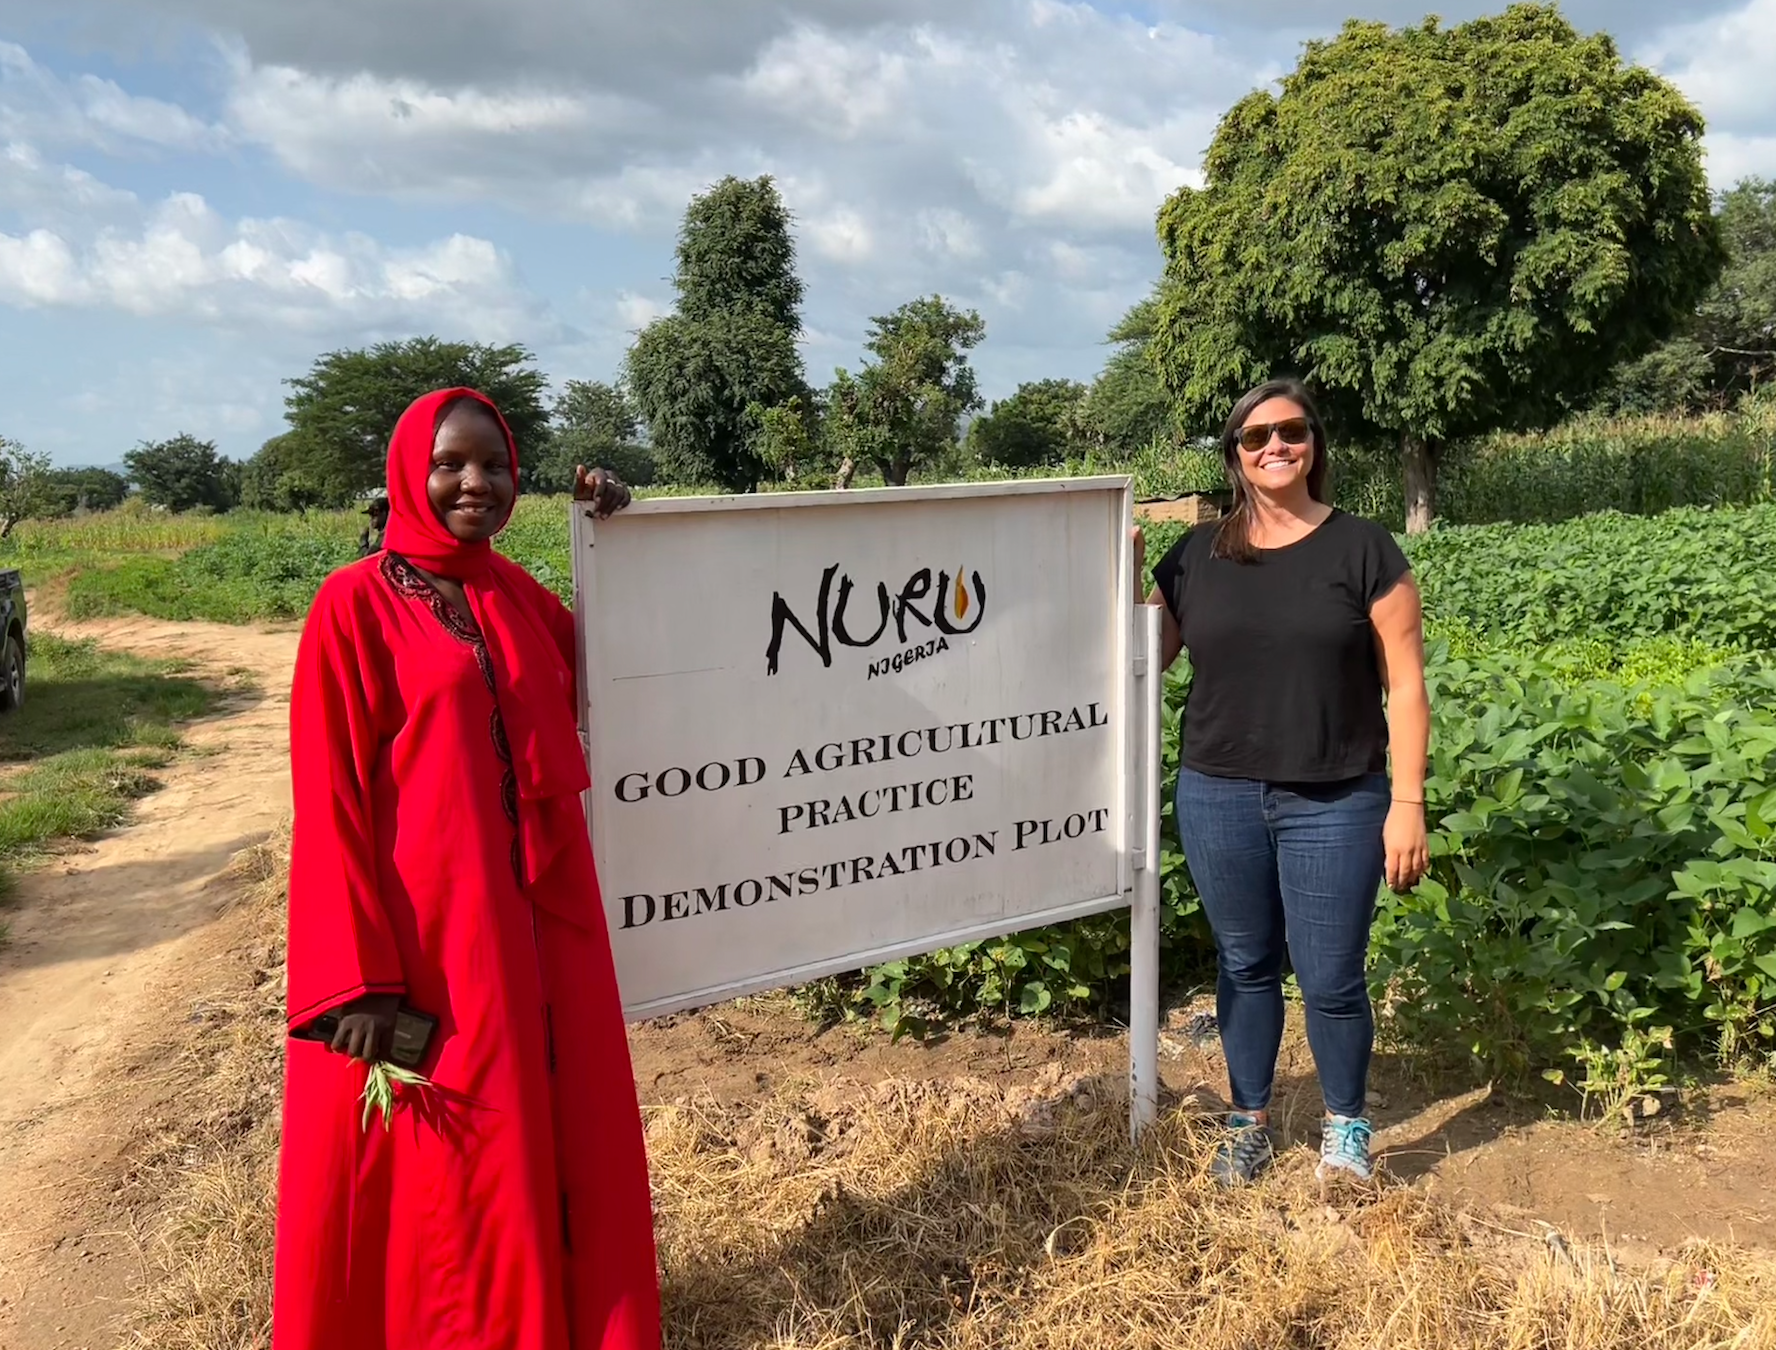 two women standing together by a Nuru Nigeria demo plot sign